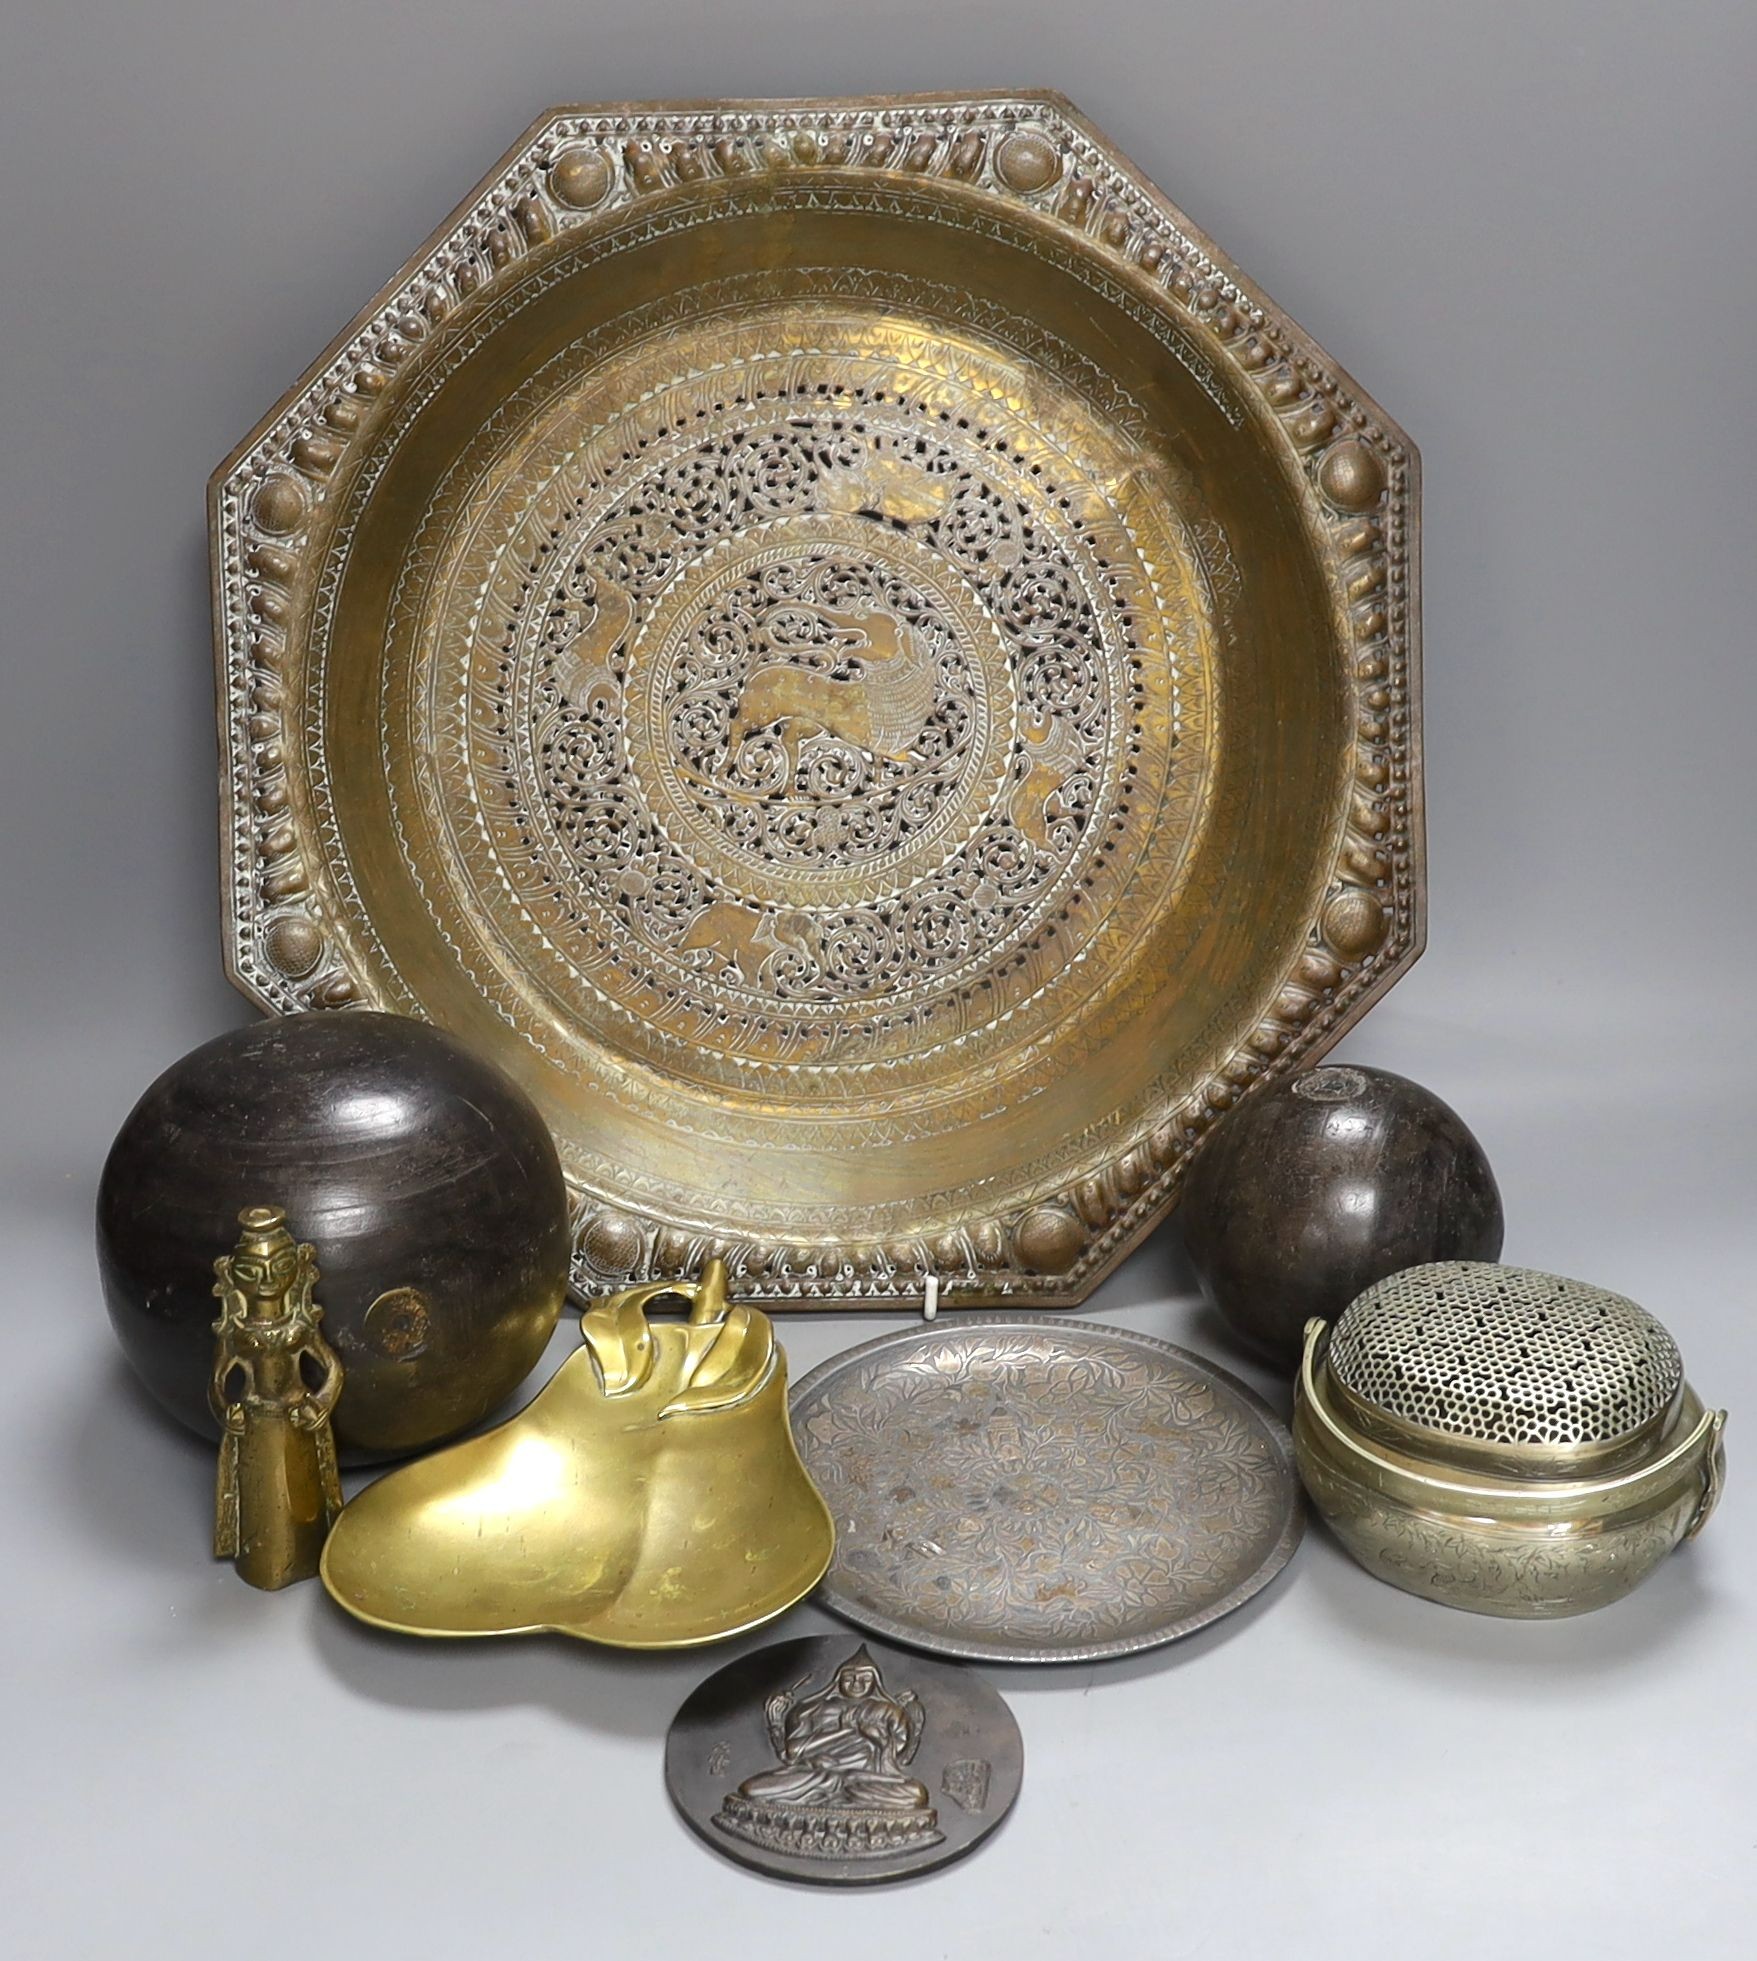 Metalware to include - a Sino-Tibetan bronze amulet, a Bidri ware dish, a Chinese paktong handwarmer Asian wood balls with inset coins etc